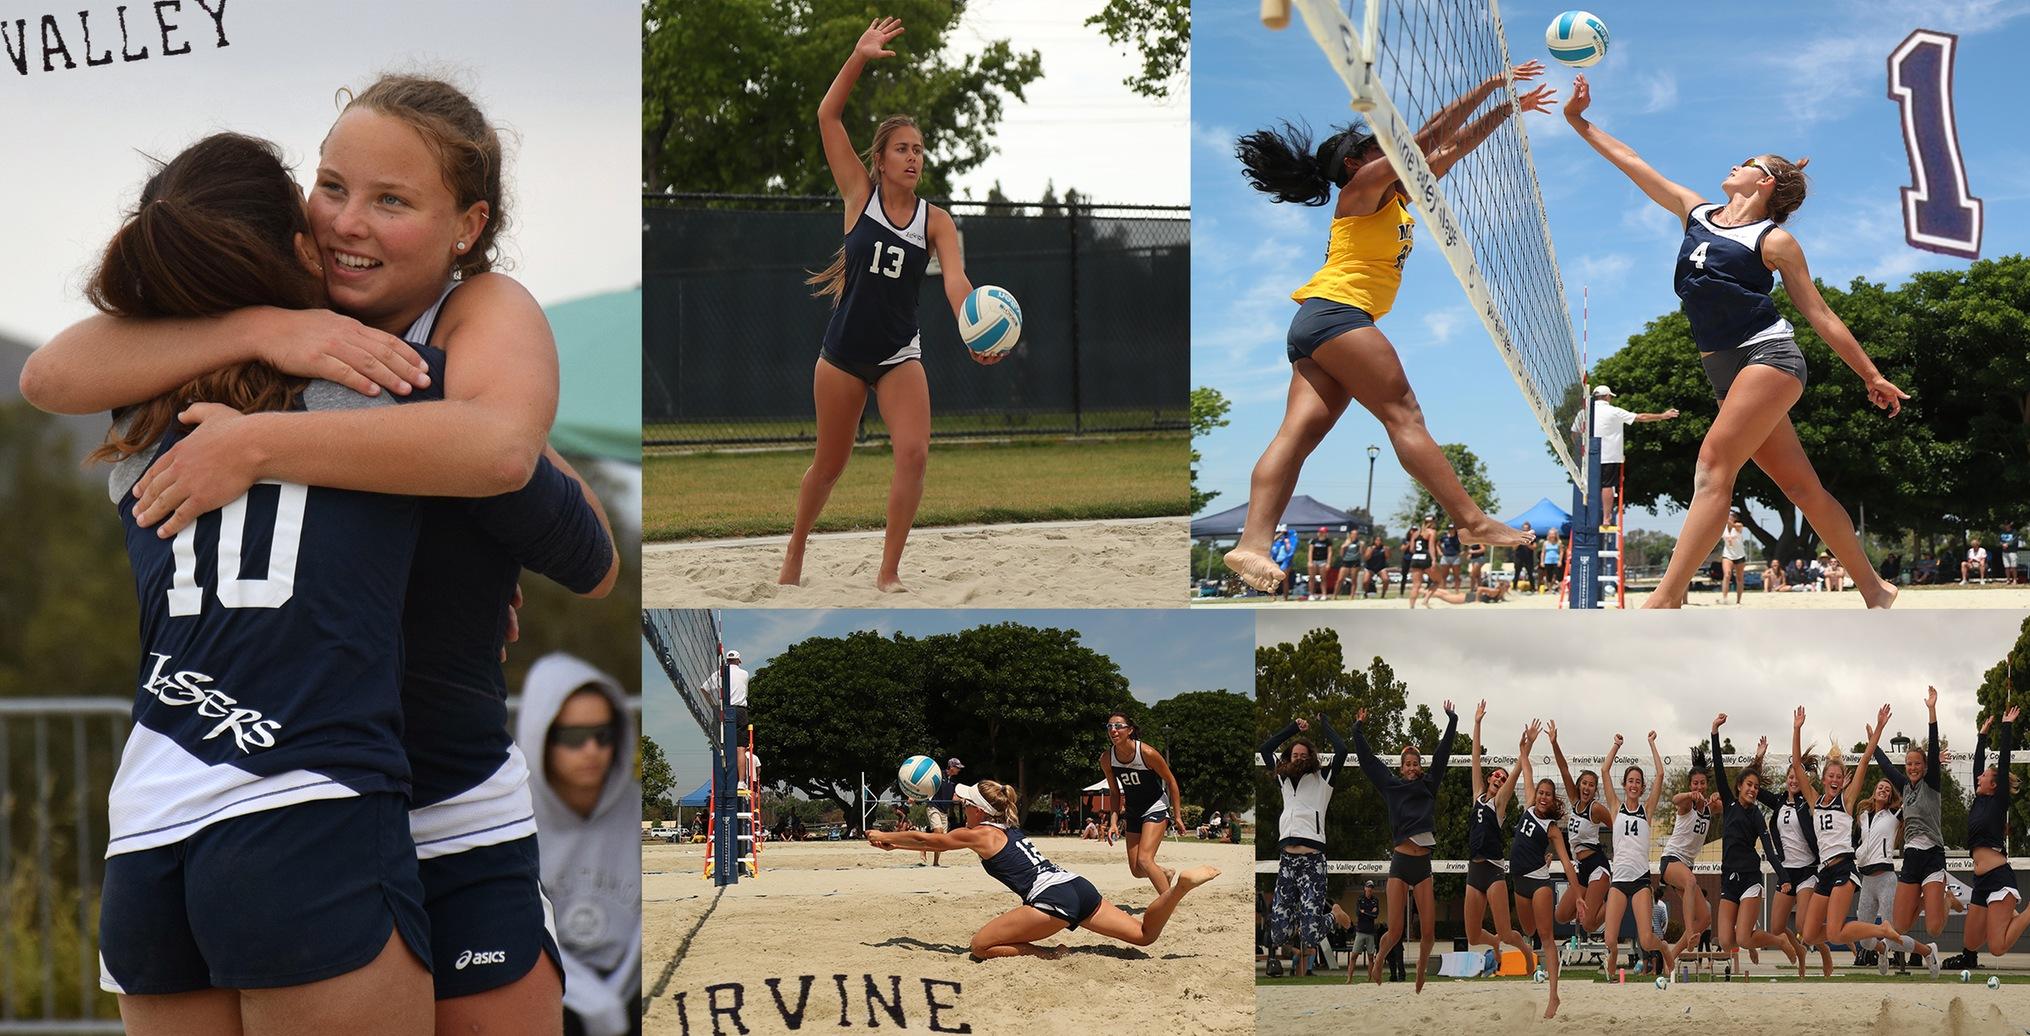 No. 1 Story of the Year - Beach volleyball team stands out